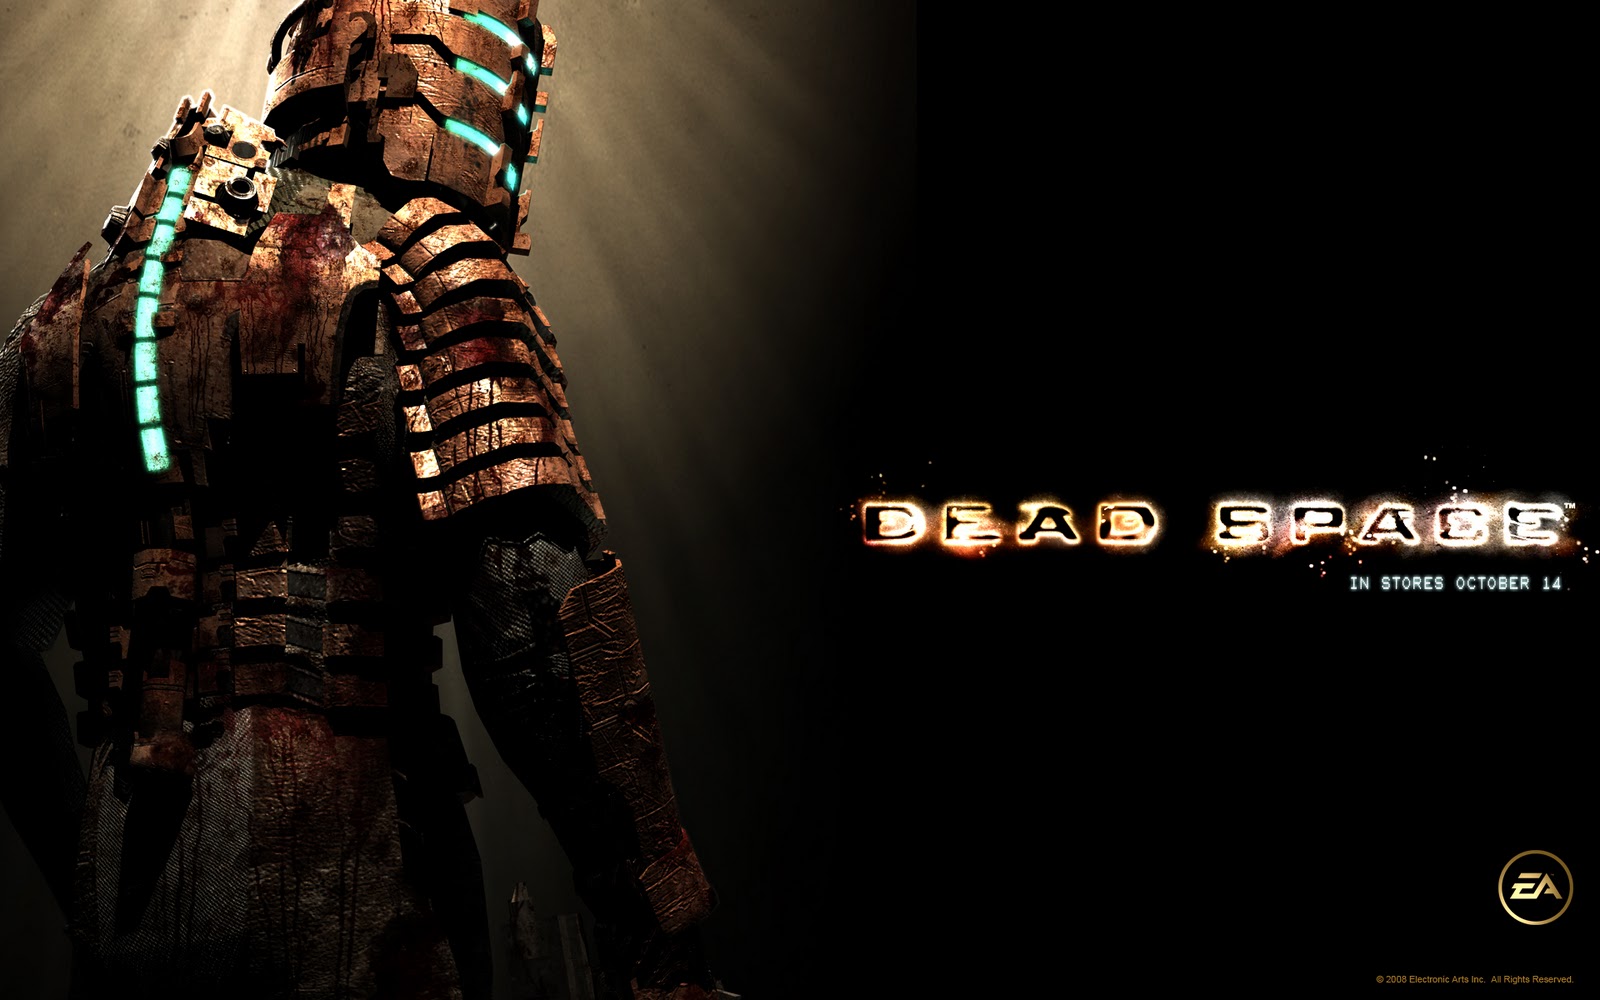 Dead Space 2 HD Wallpapers and DVD Cover Download Free Wallpapers in